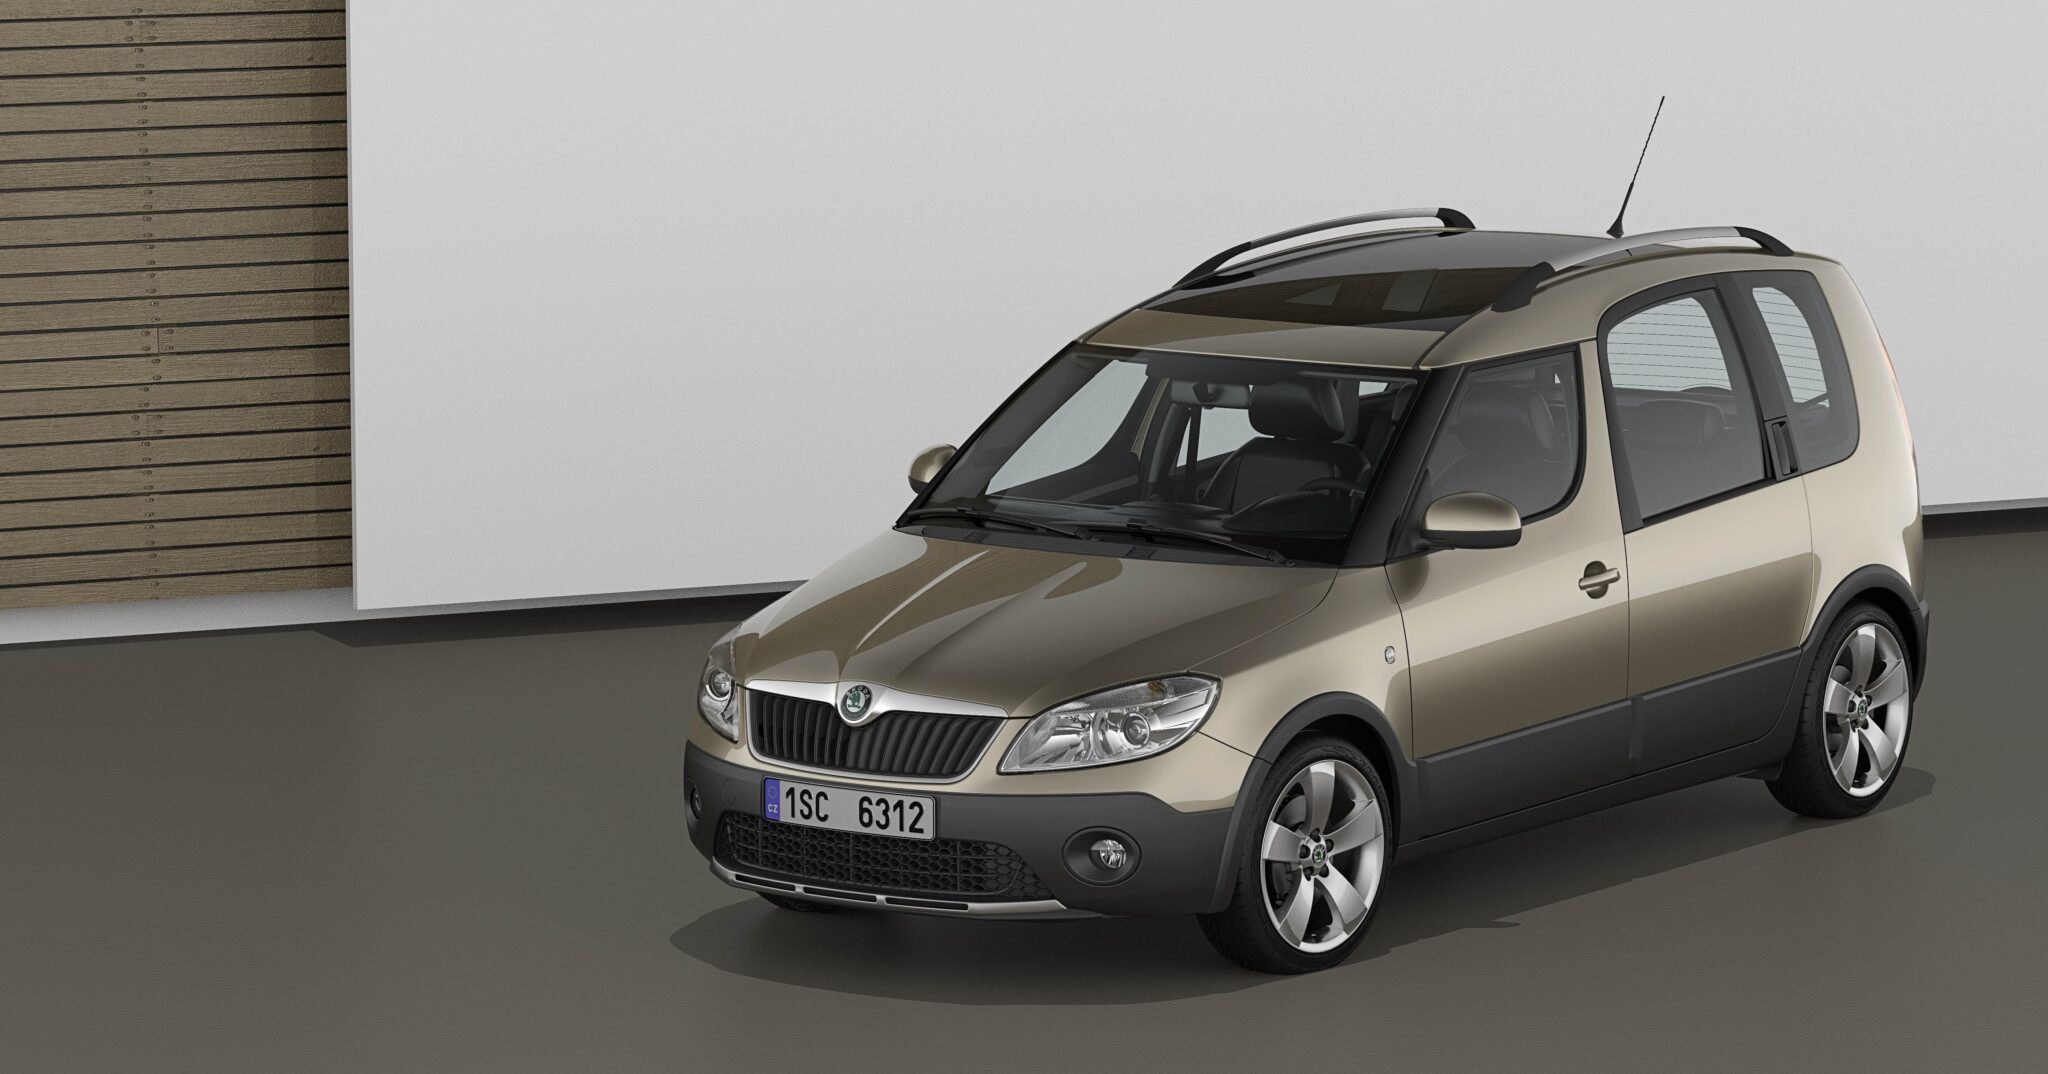 Skoda Roomster Review - Drive